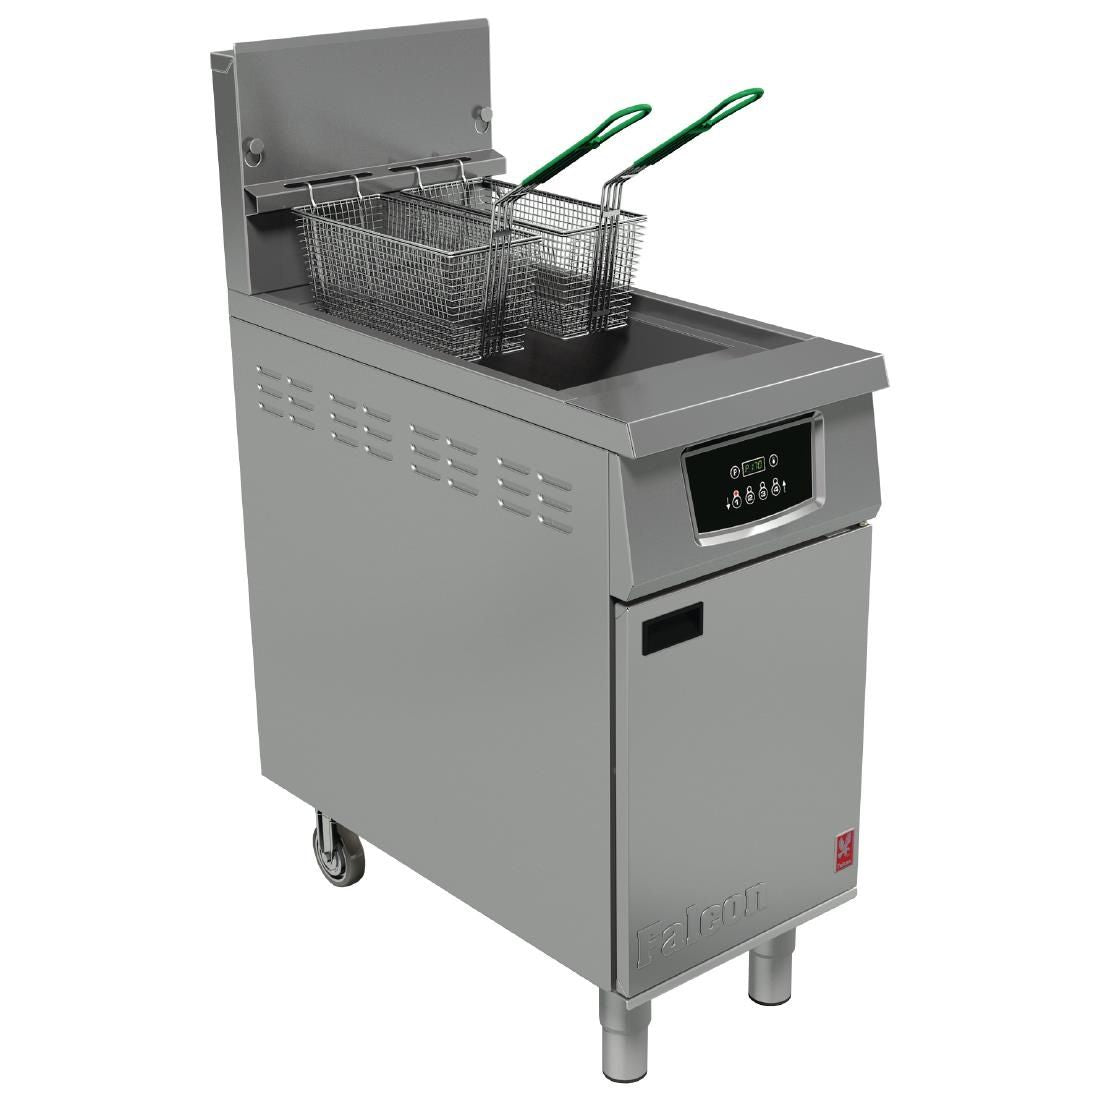 Falcon 400 Series Single Tank Twin Basket Free Standing Natural or LPG Gas Filtration Fryer G402F JD Catering Equipment Solutions Ltd